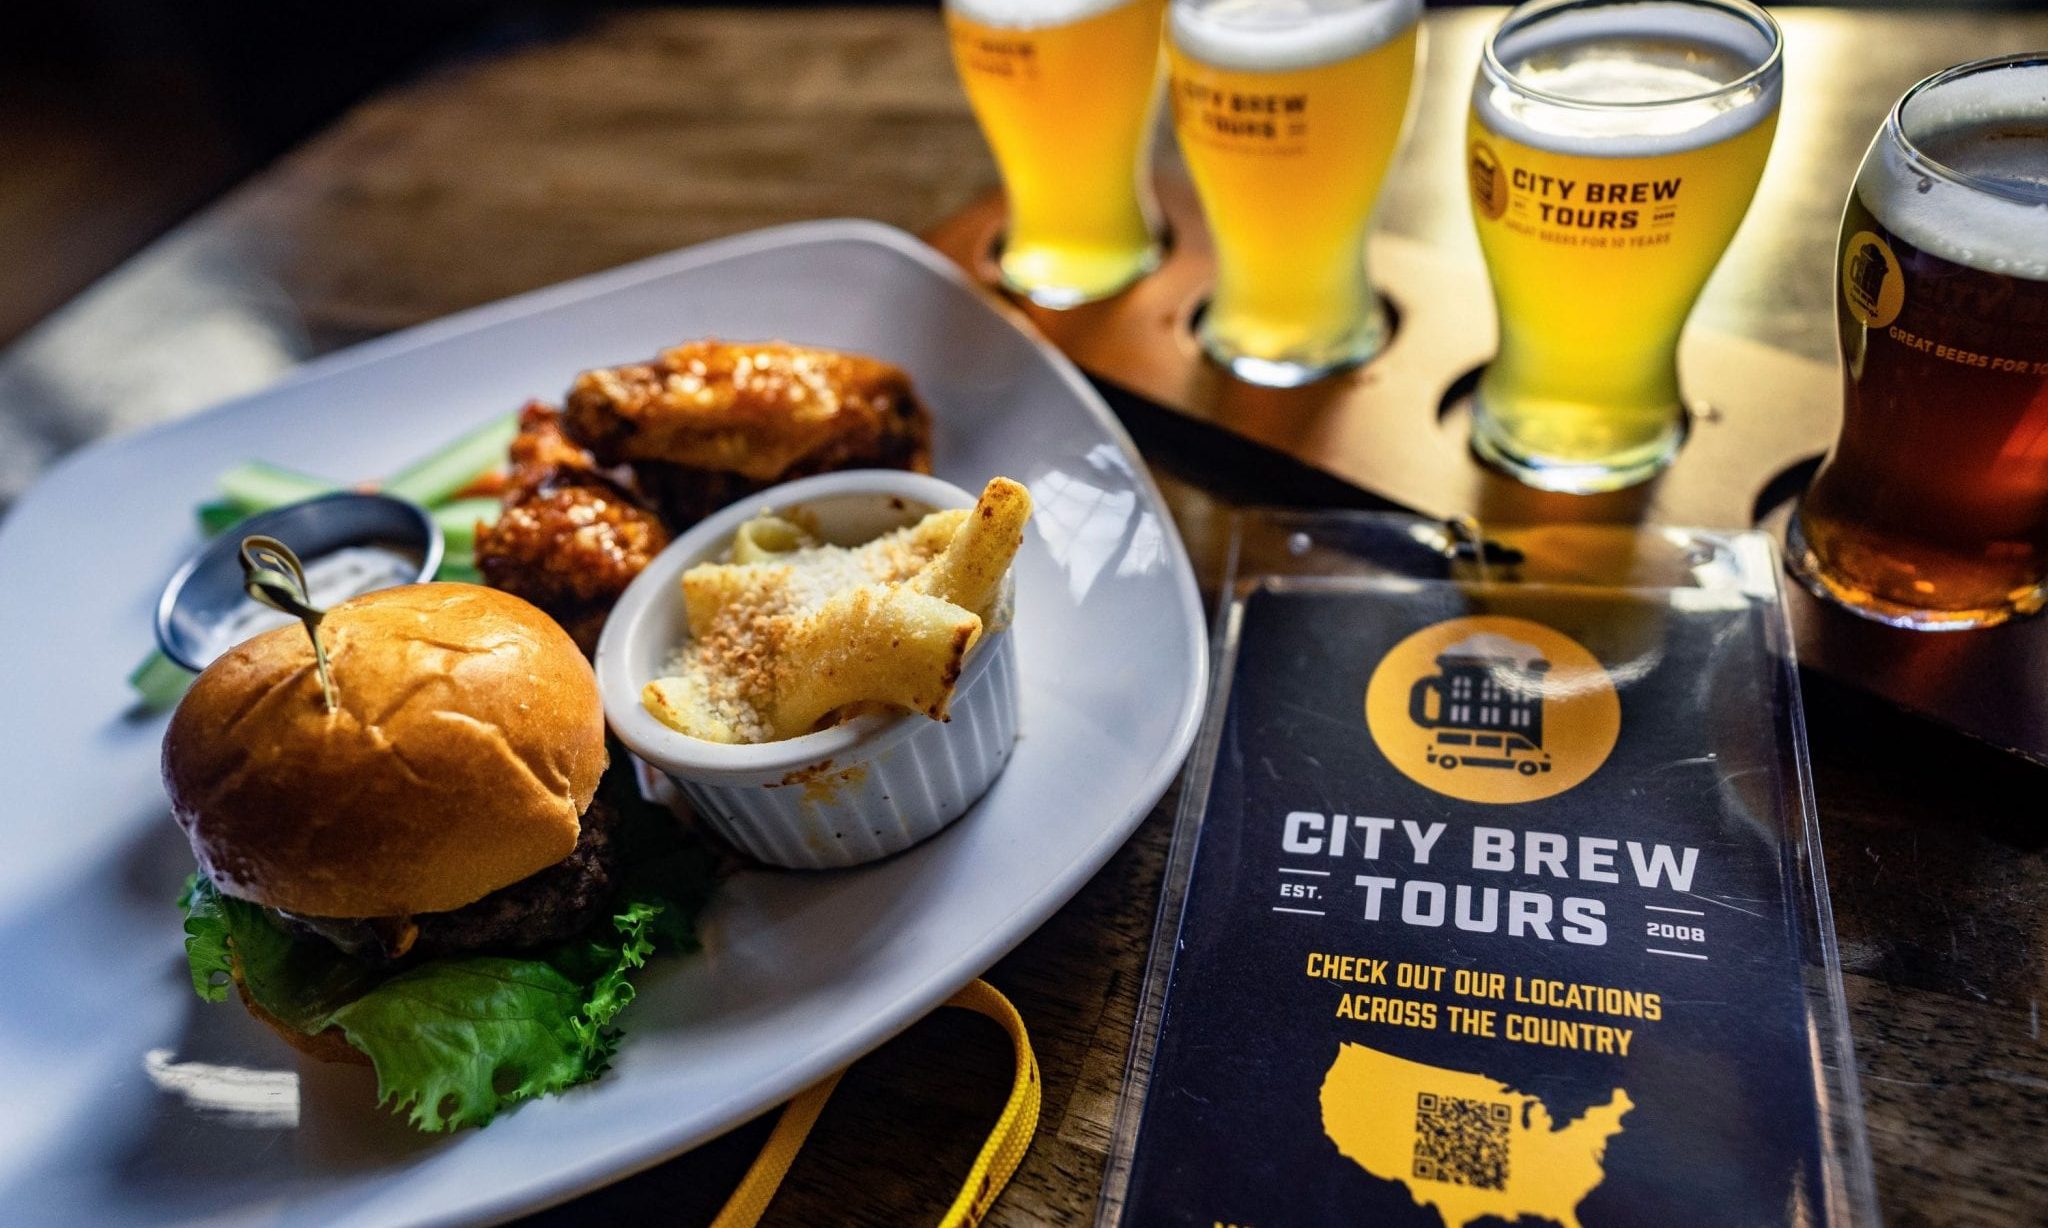 The Brass Tap meal and beer pairing in Baltimore